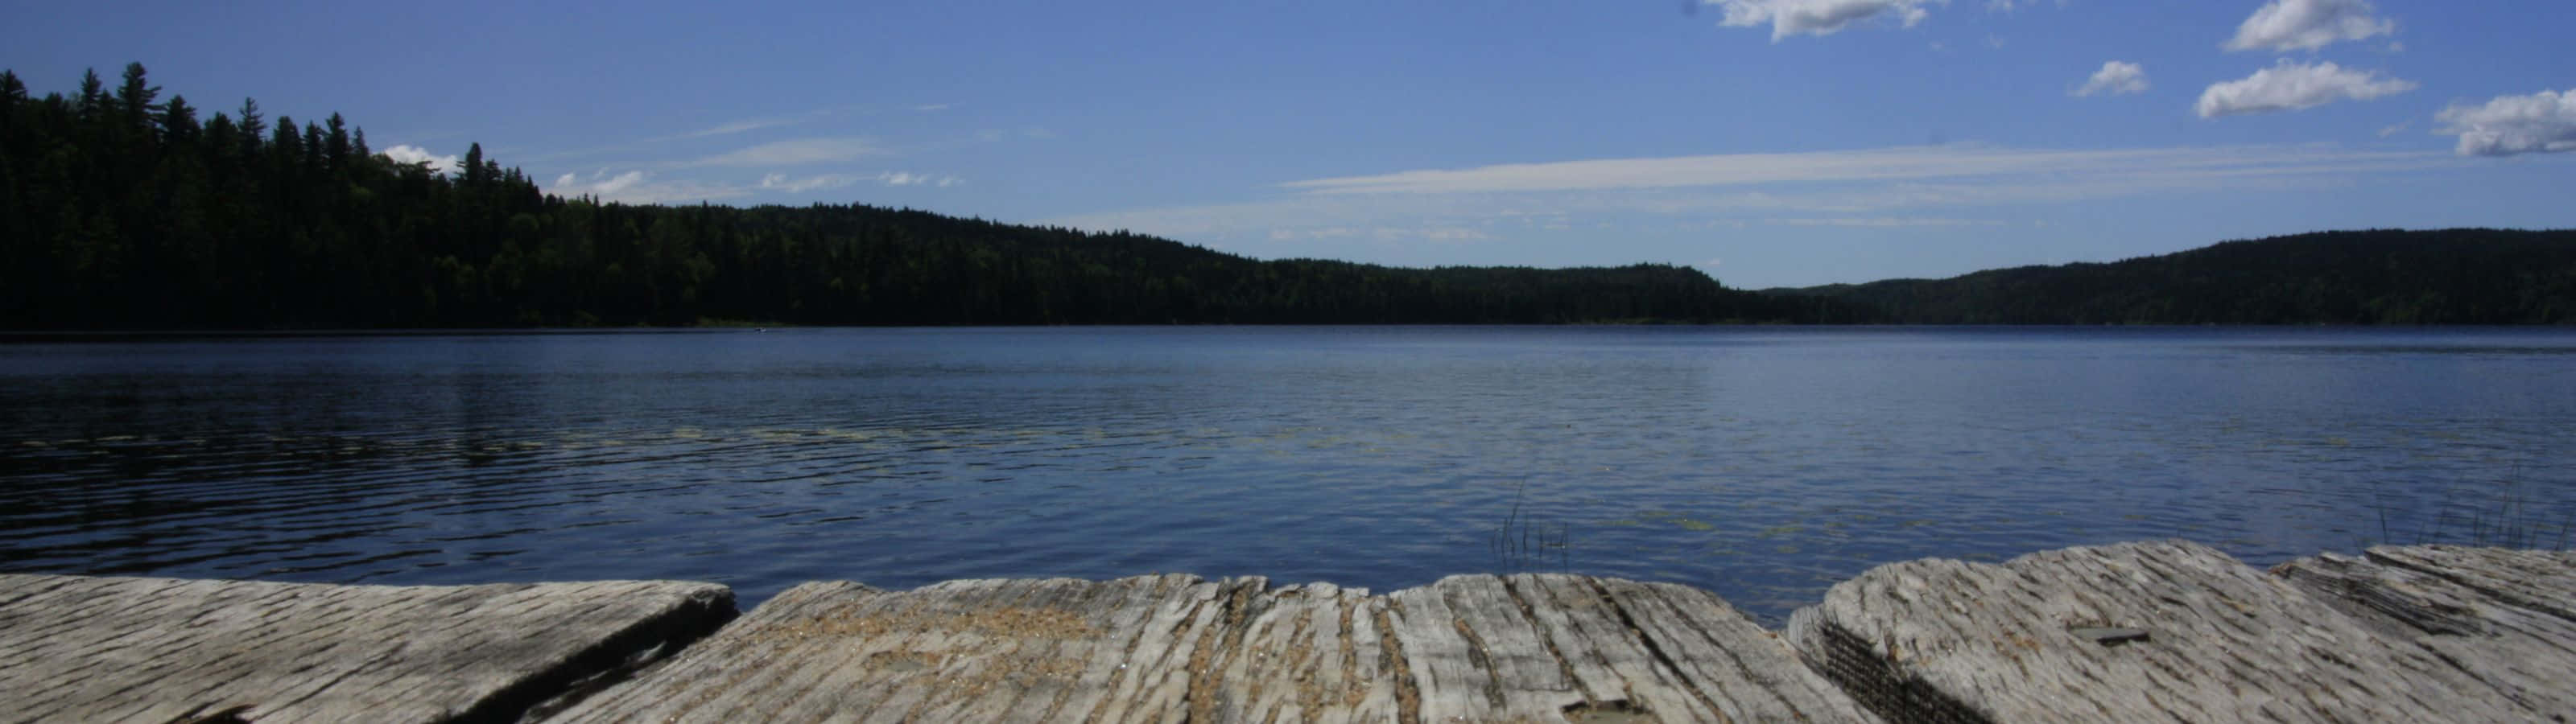 A Wooden Dock Is In The Middle Of A Lake Background